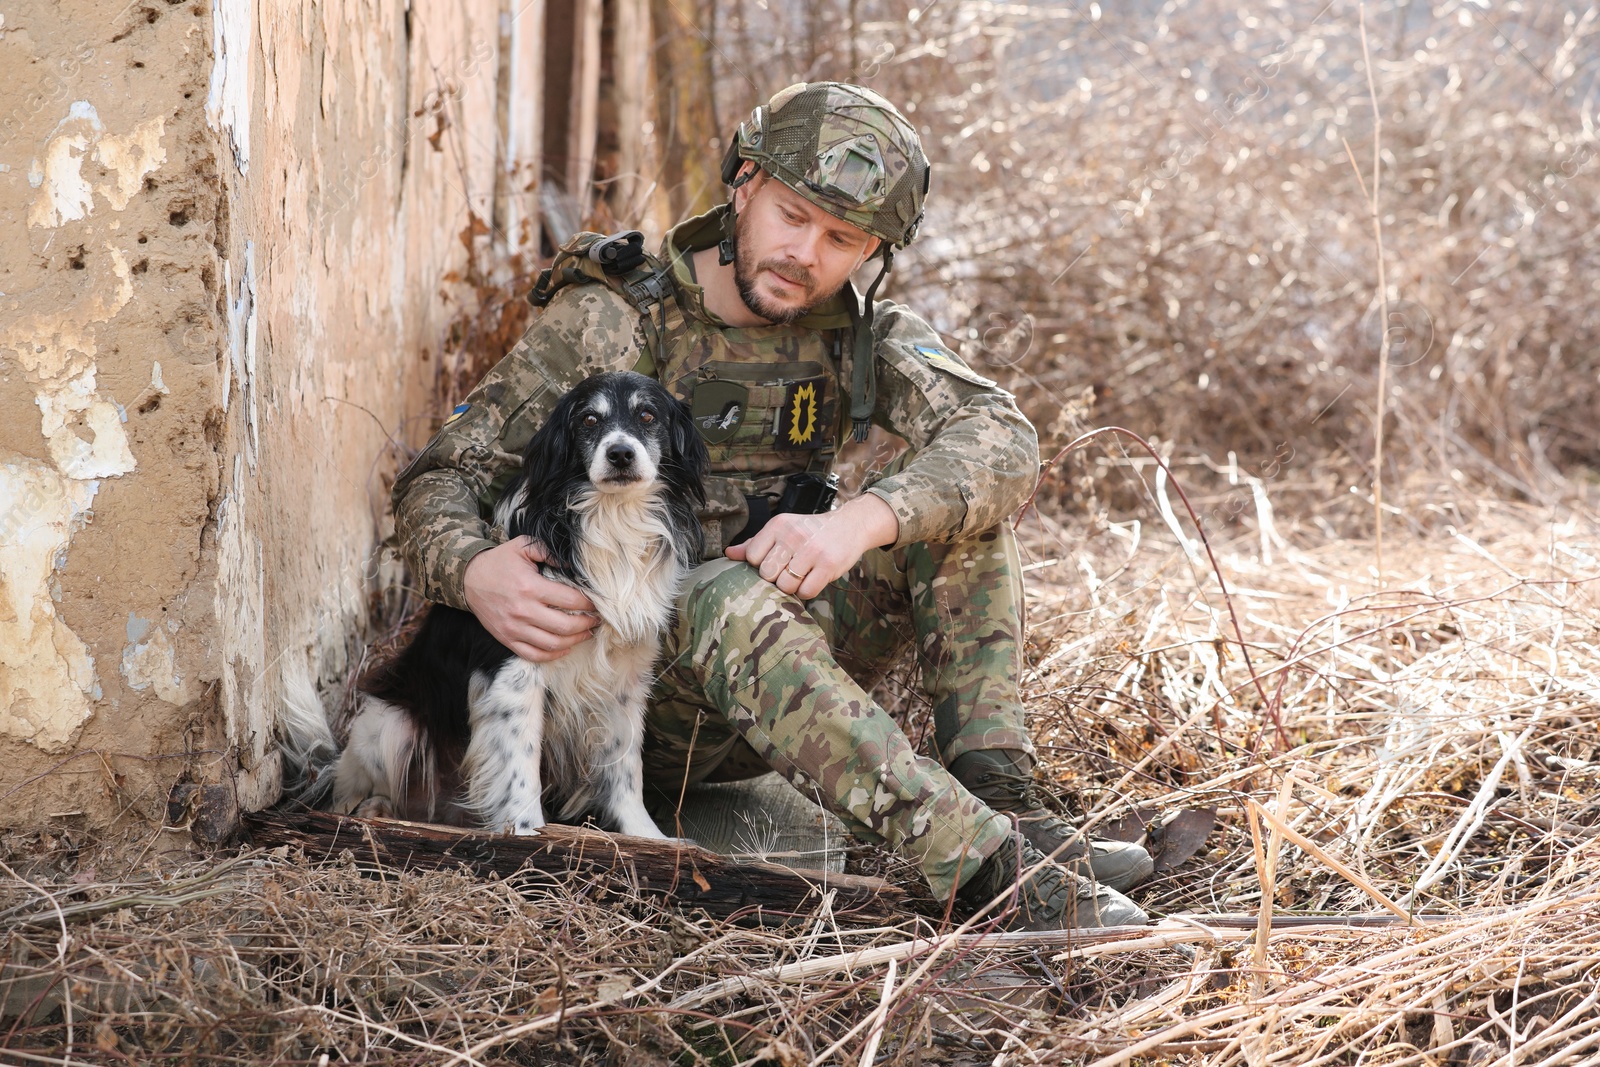 Photo of Ukrainian soldier with stray dog sitting outdoors